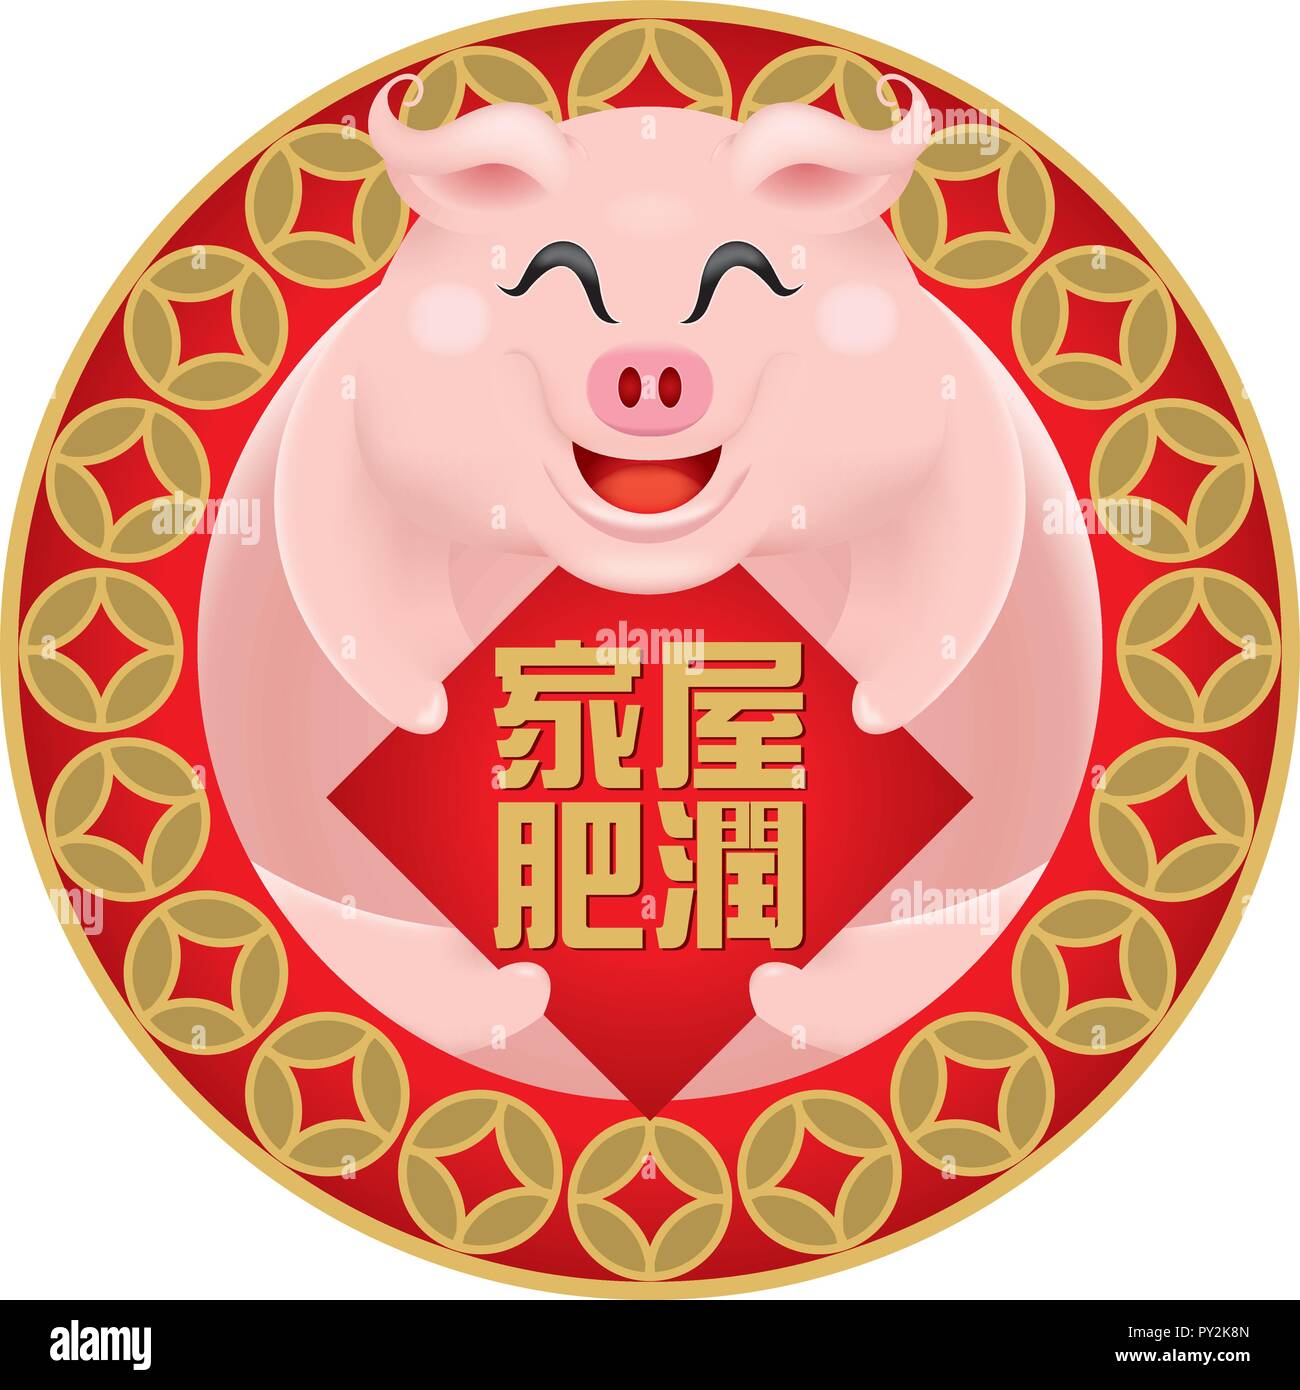 Cute little pig's image for Chinese New Year 2019, also the year of the pig. Caption: Family is harmony and prosperous. Stock Vector